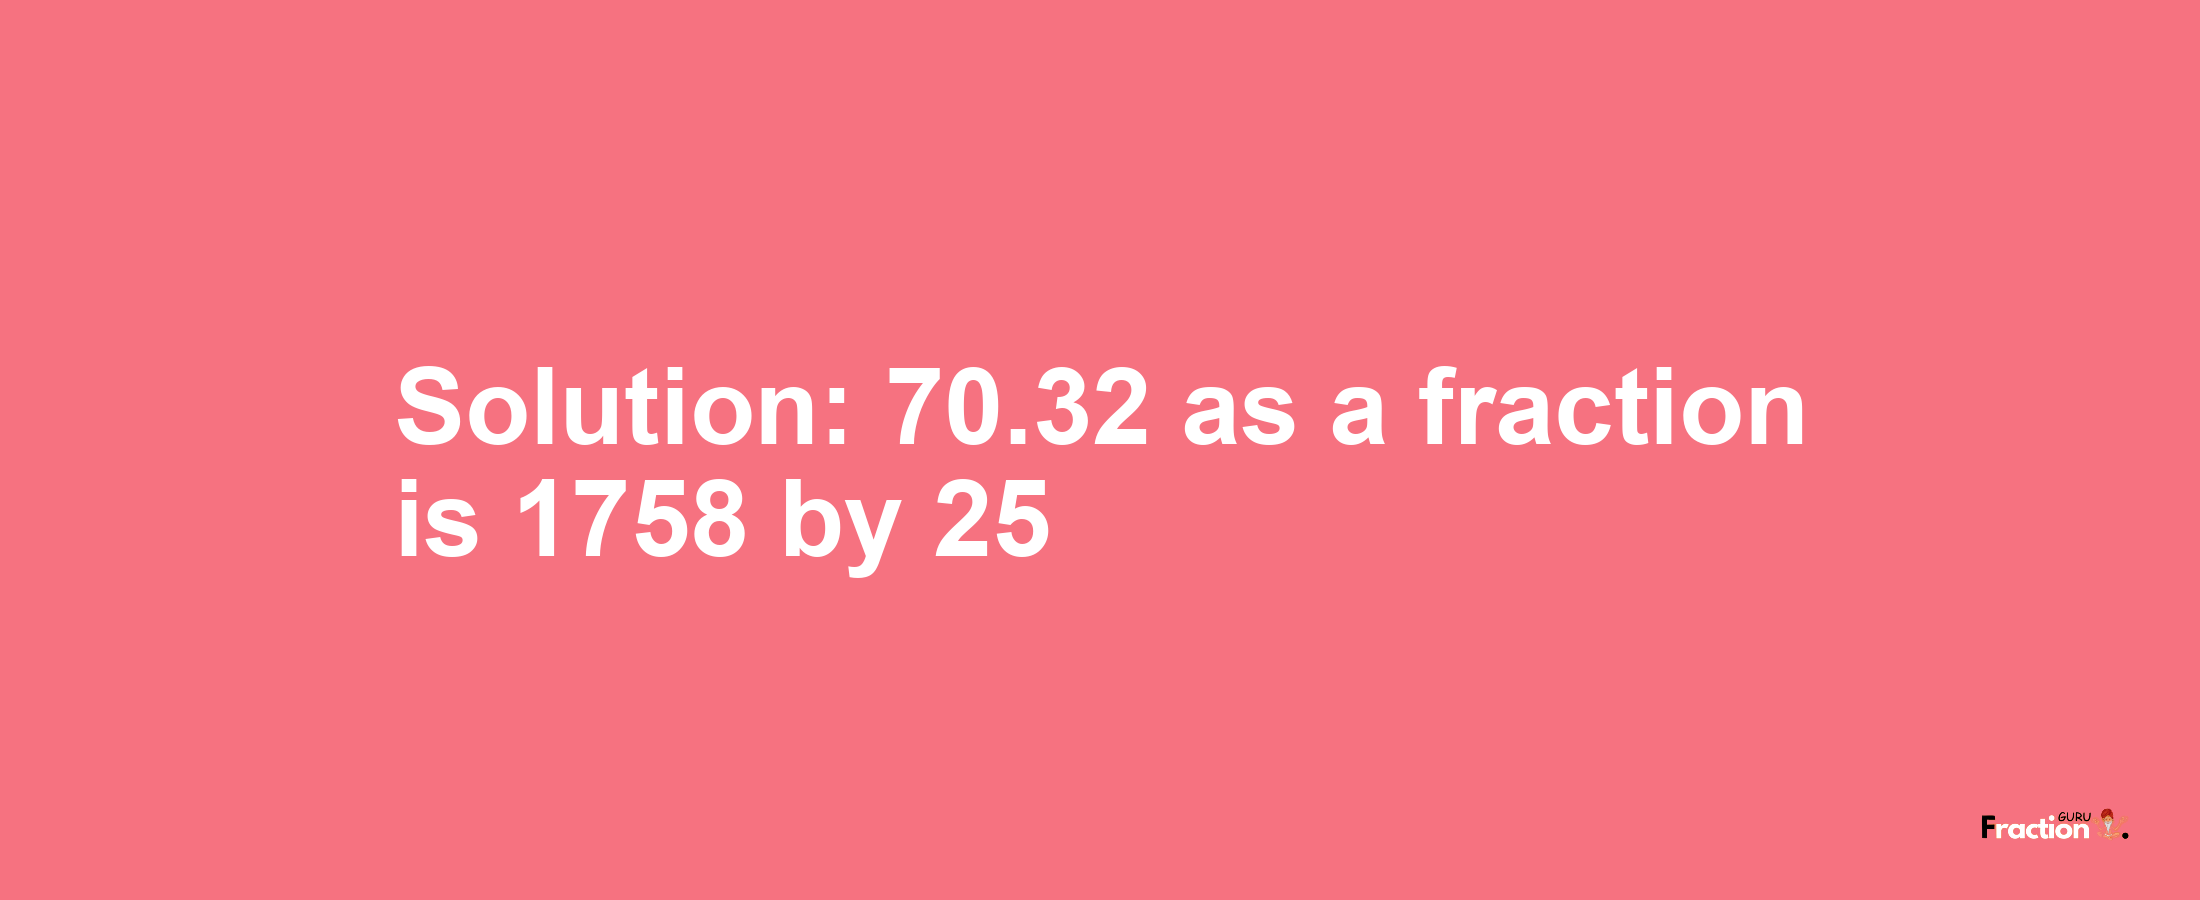 Solution:70.32 as a fraction is 1758/25